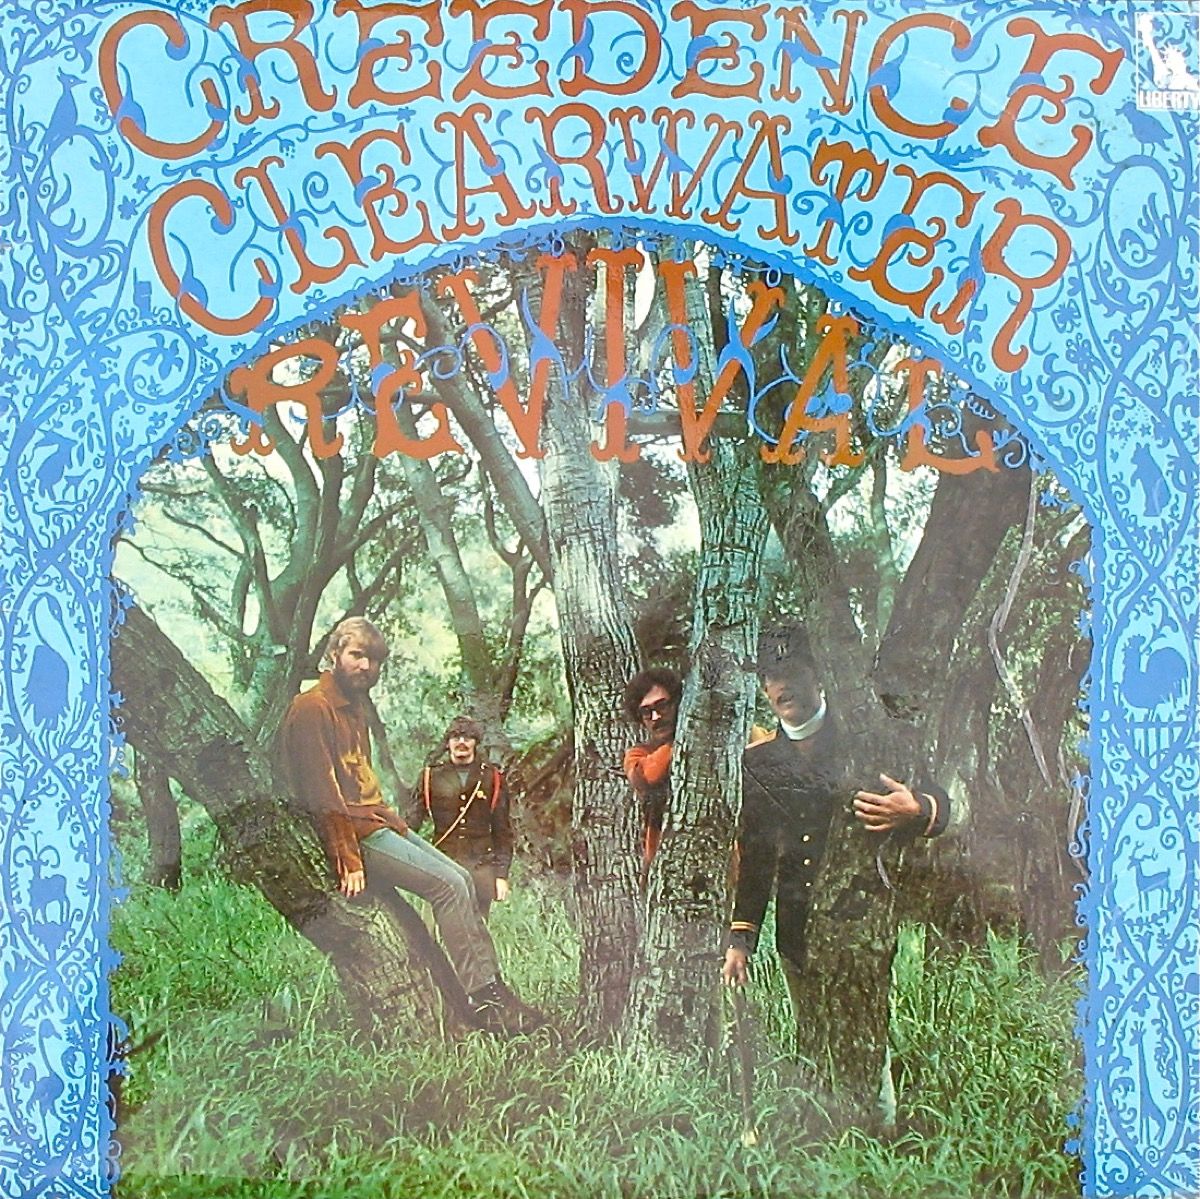 Creedence Clearwater Revival -albumin kansi